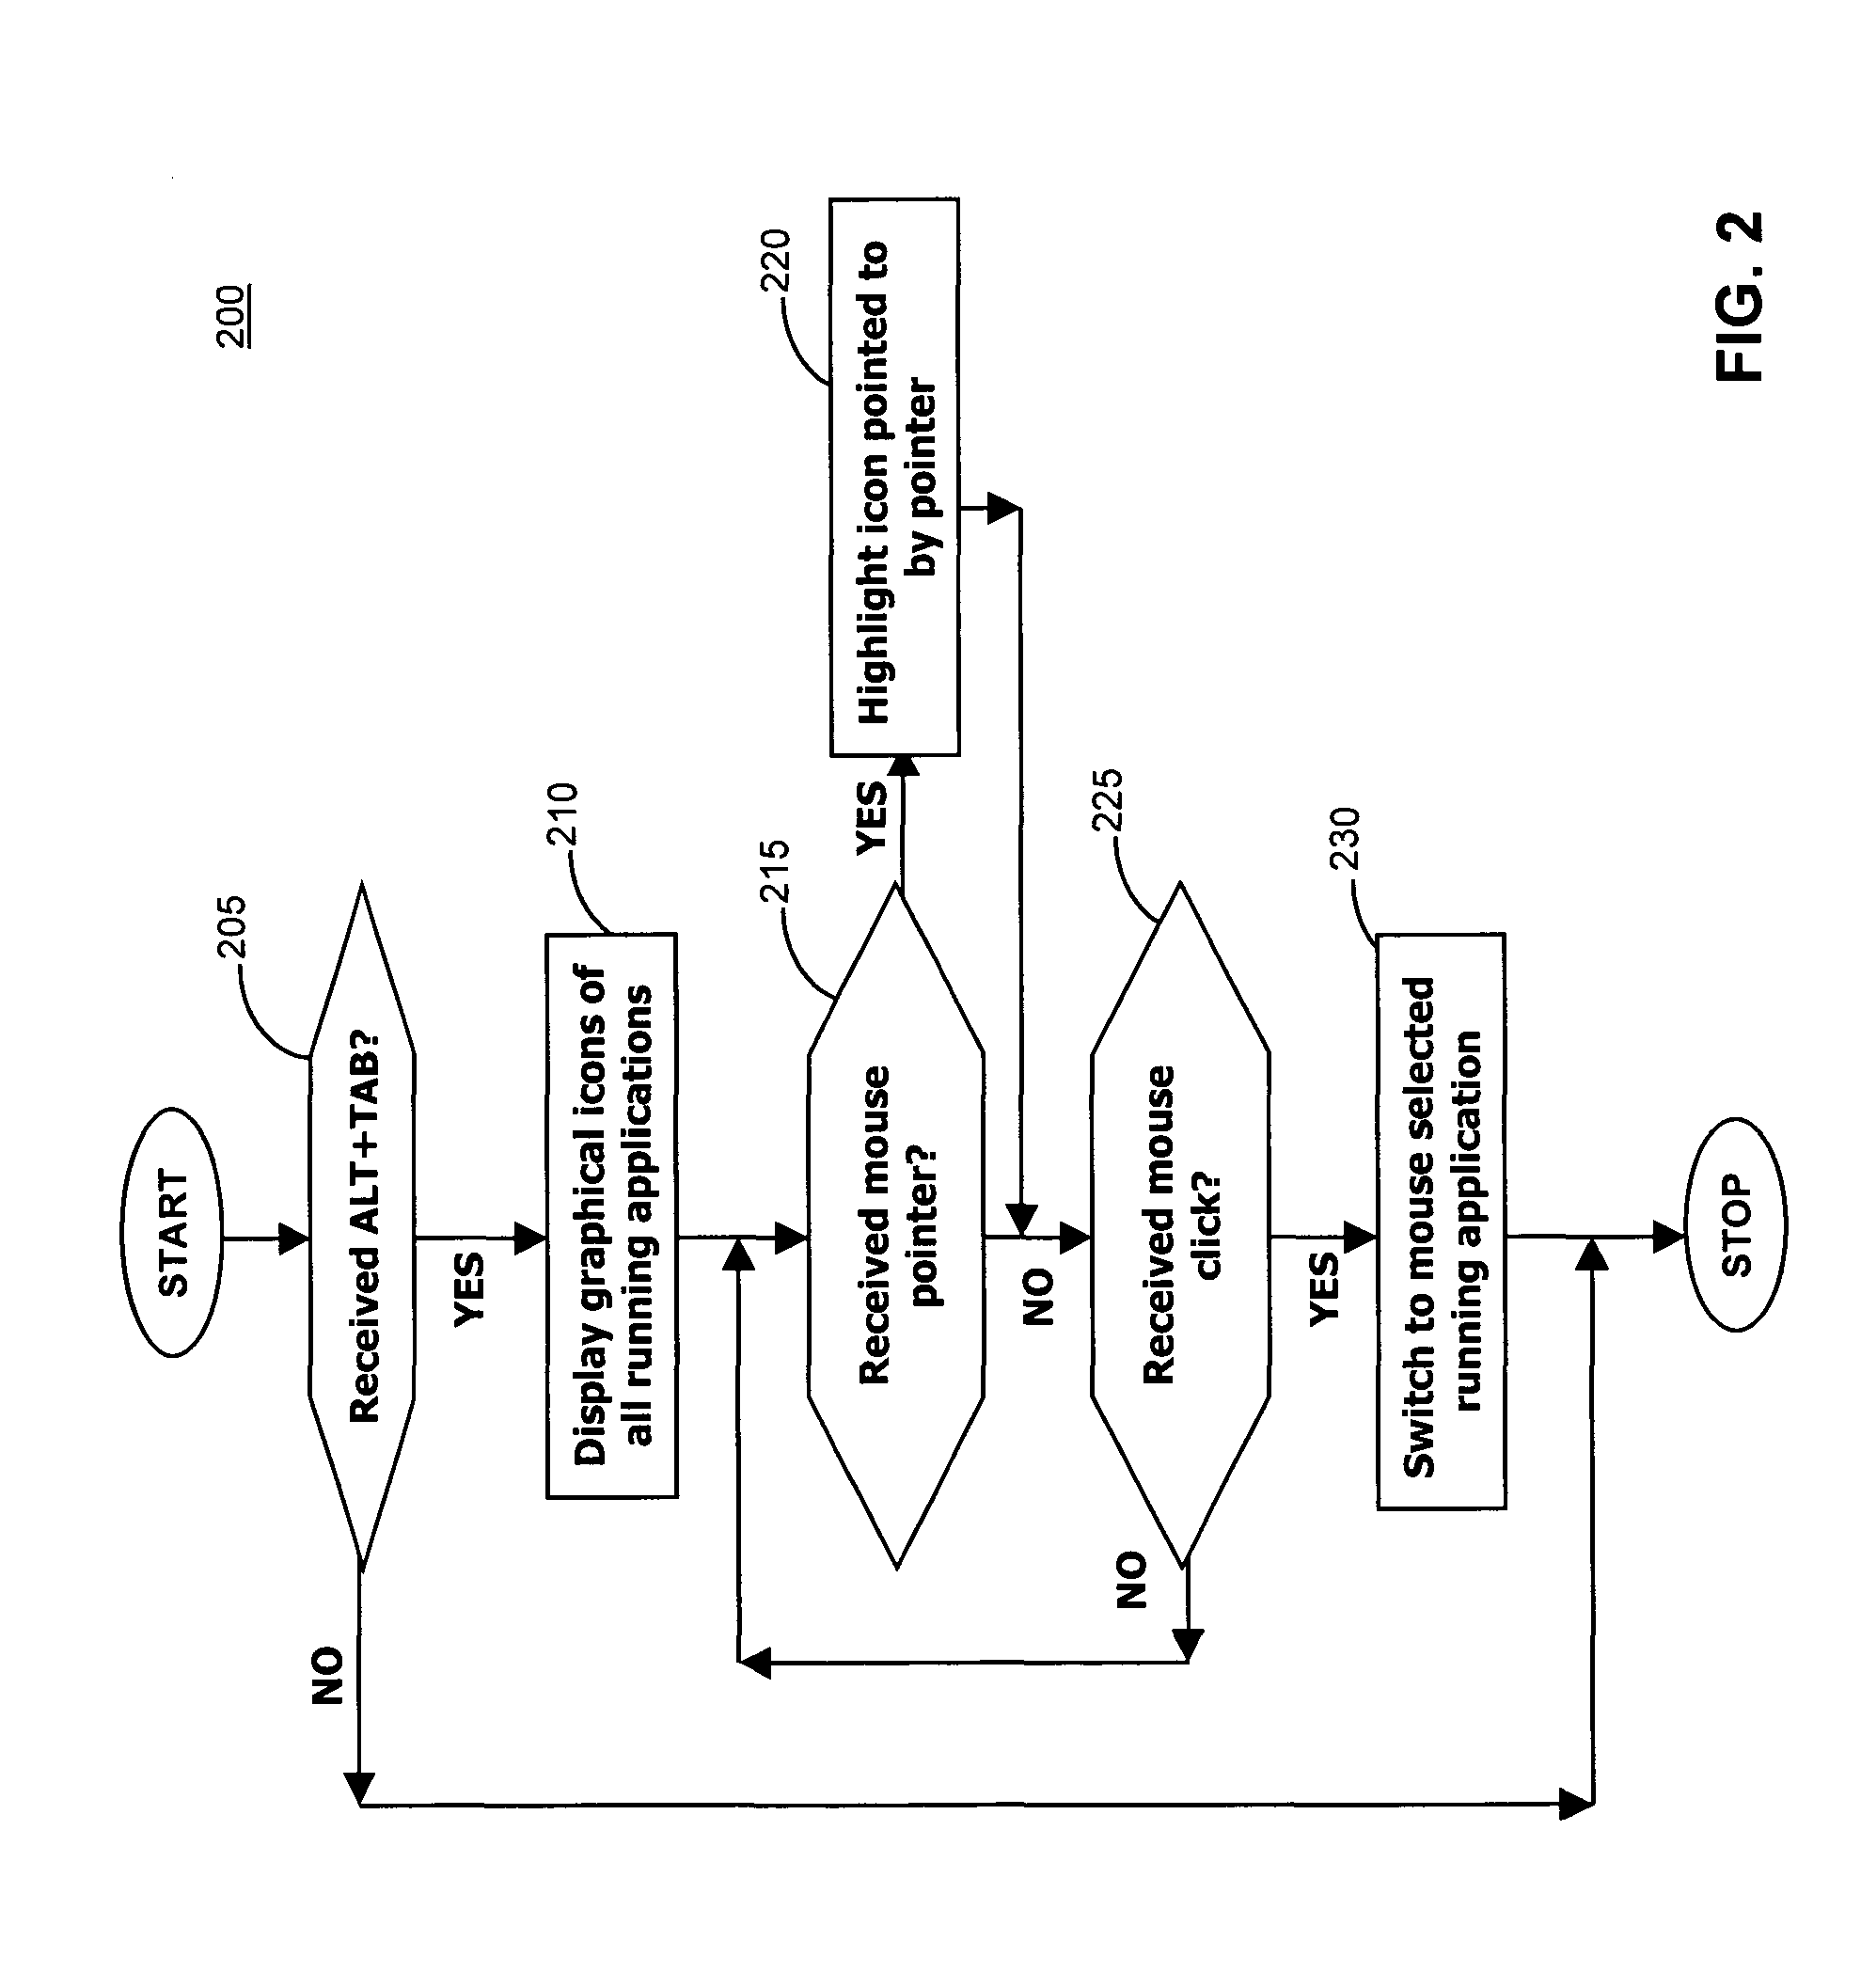 Multi-modal method for application swapping